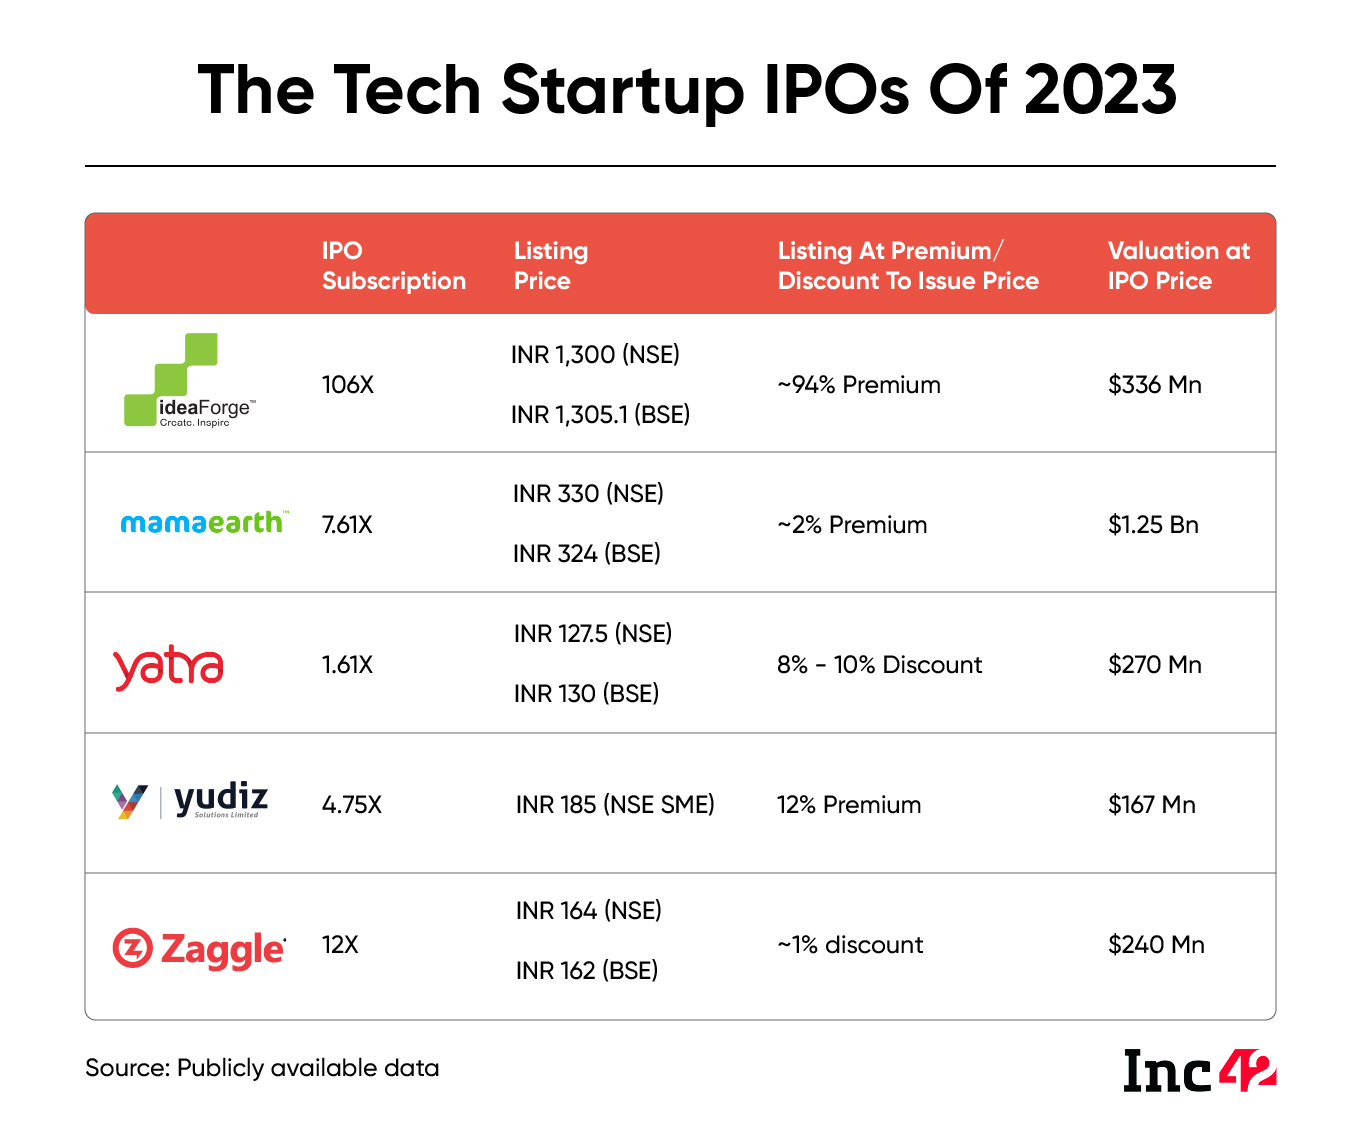 The tech startup IPOs of 2023